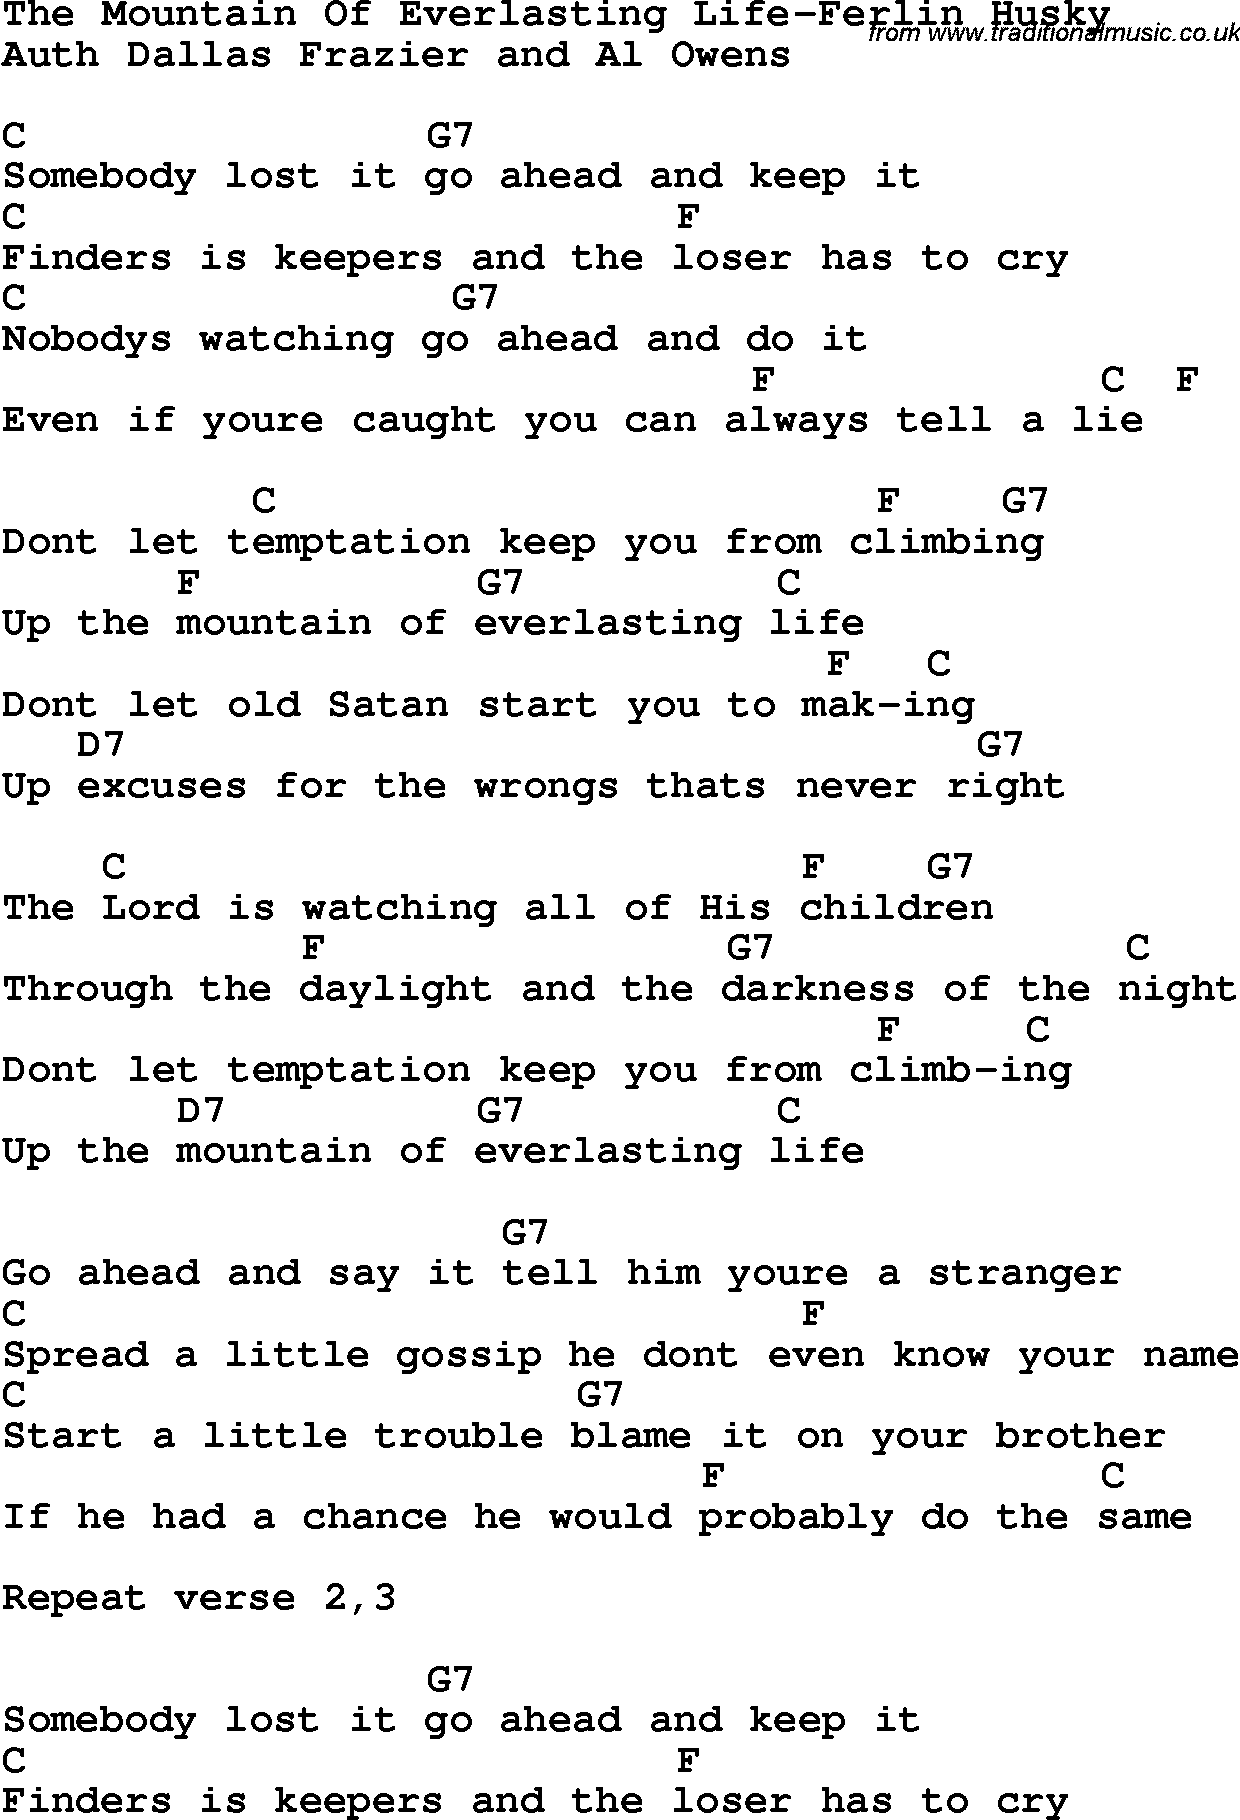 Country, Southern and Bluegrass Gospel Song The Mountain Of Everlasting Life-Ferlin Husky lyrics and chords